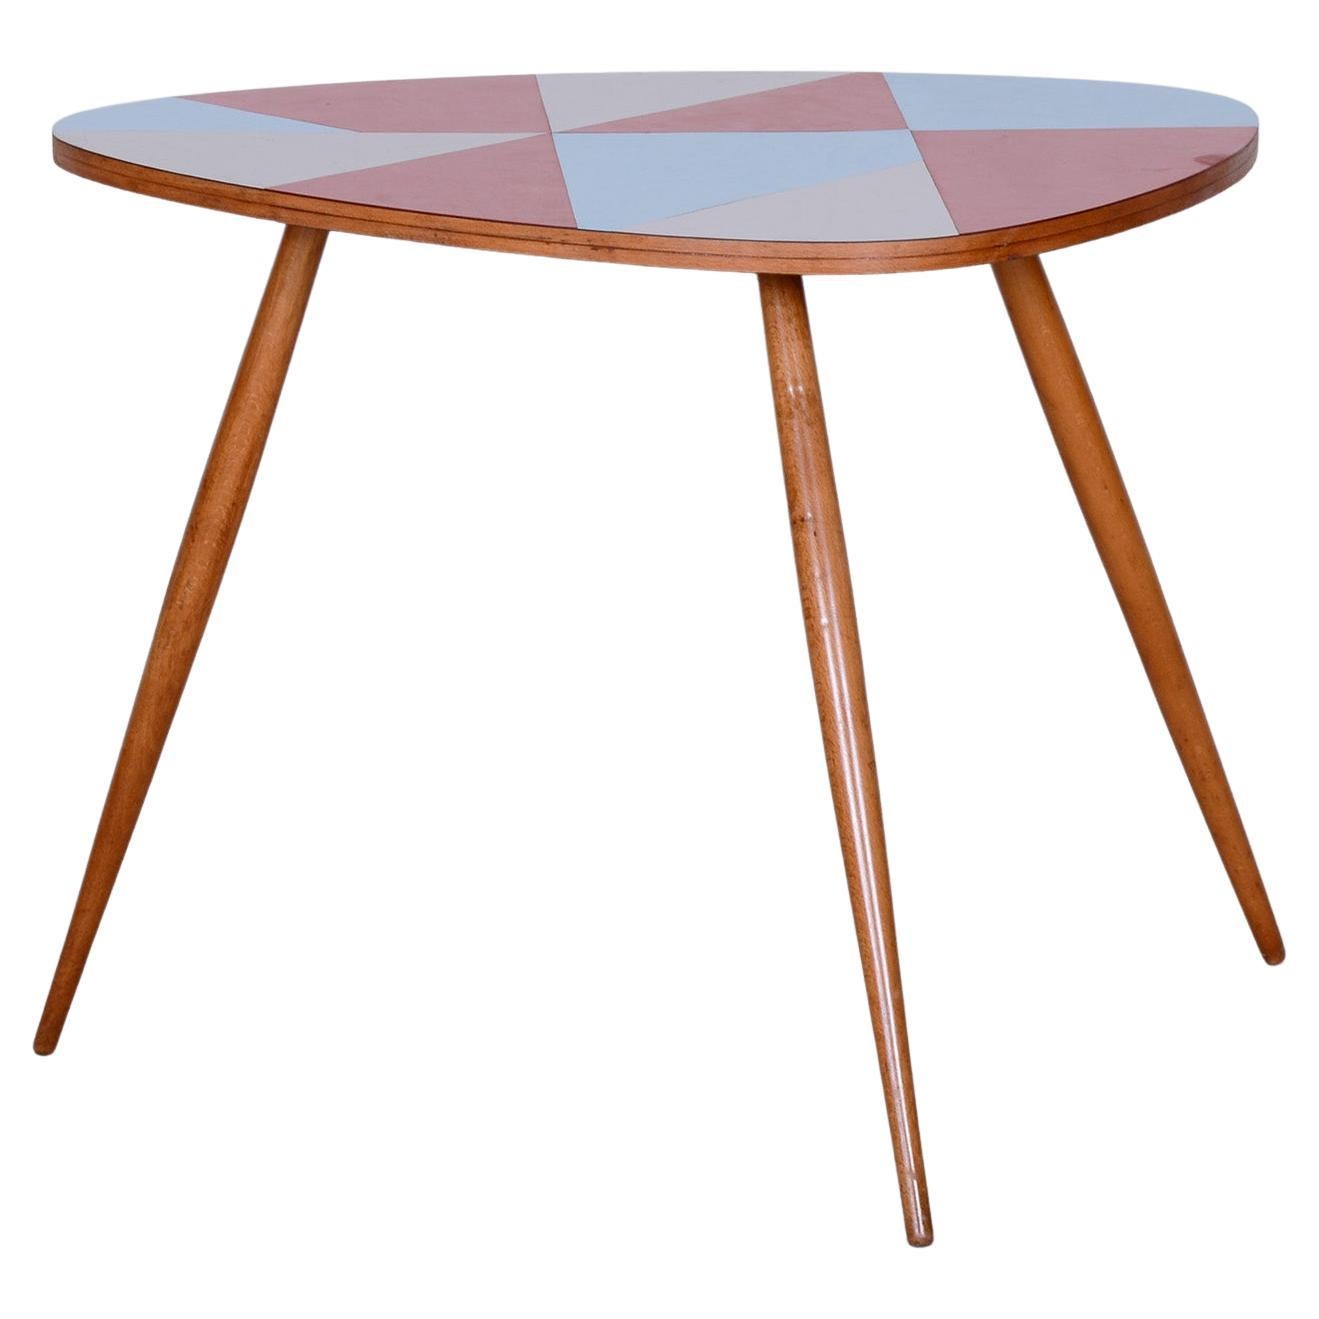 Small Restored Midcentury Table, Beech and Umakart, Czechia, 1950s For Sale